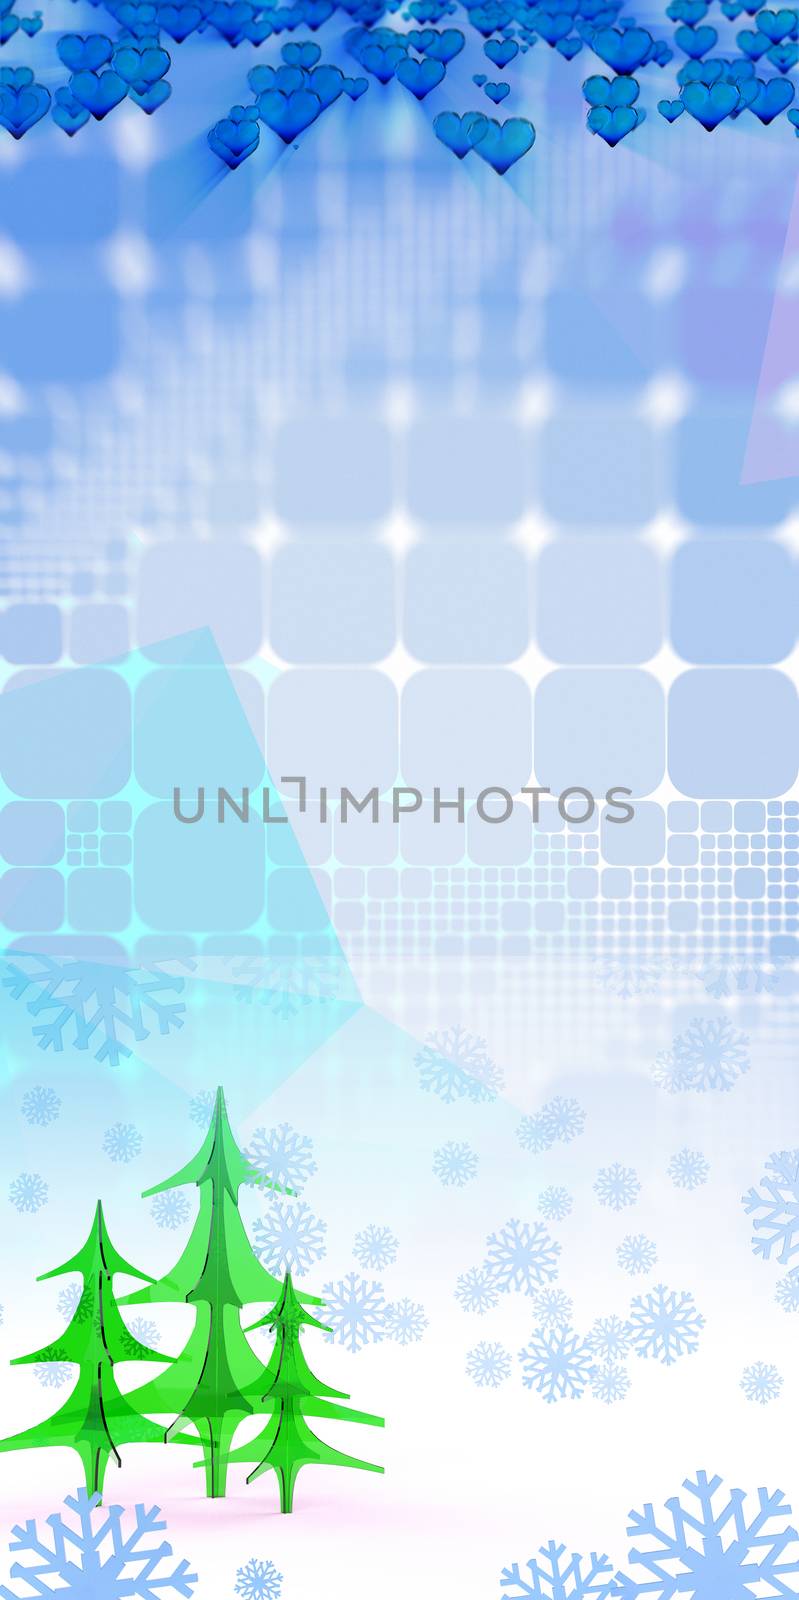 geometric square abstract background with christmas tree hearts and snowflakes. 3d illustration.